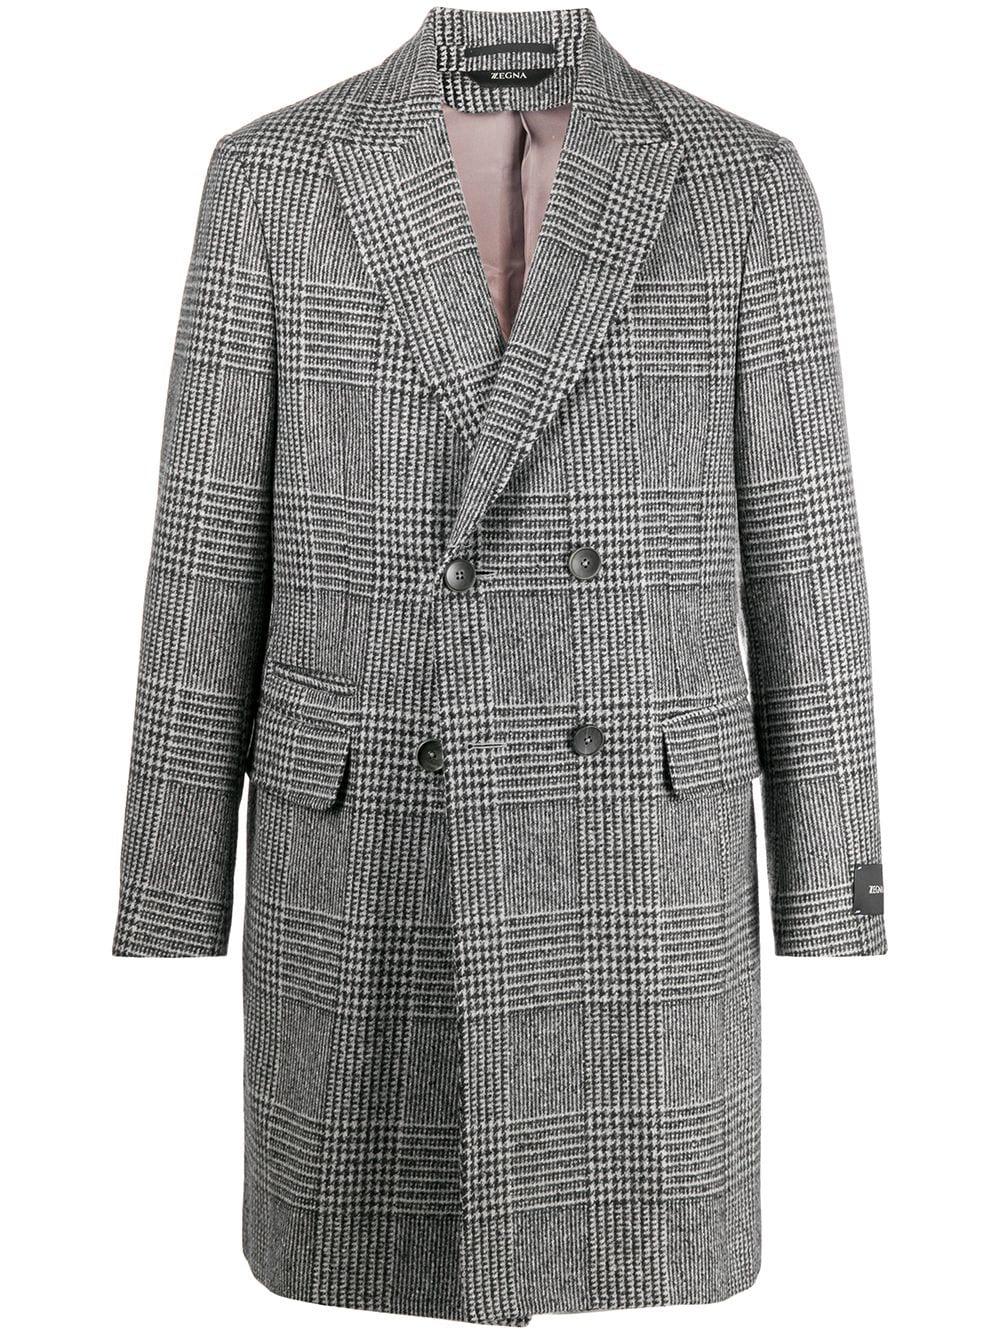 Z Zegna Wool Double-breasted Houndstooth Coat in Grey (Gray) for Men - Lyst